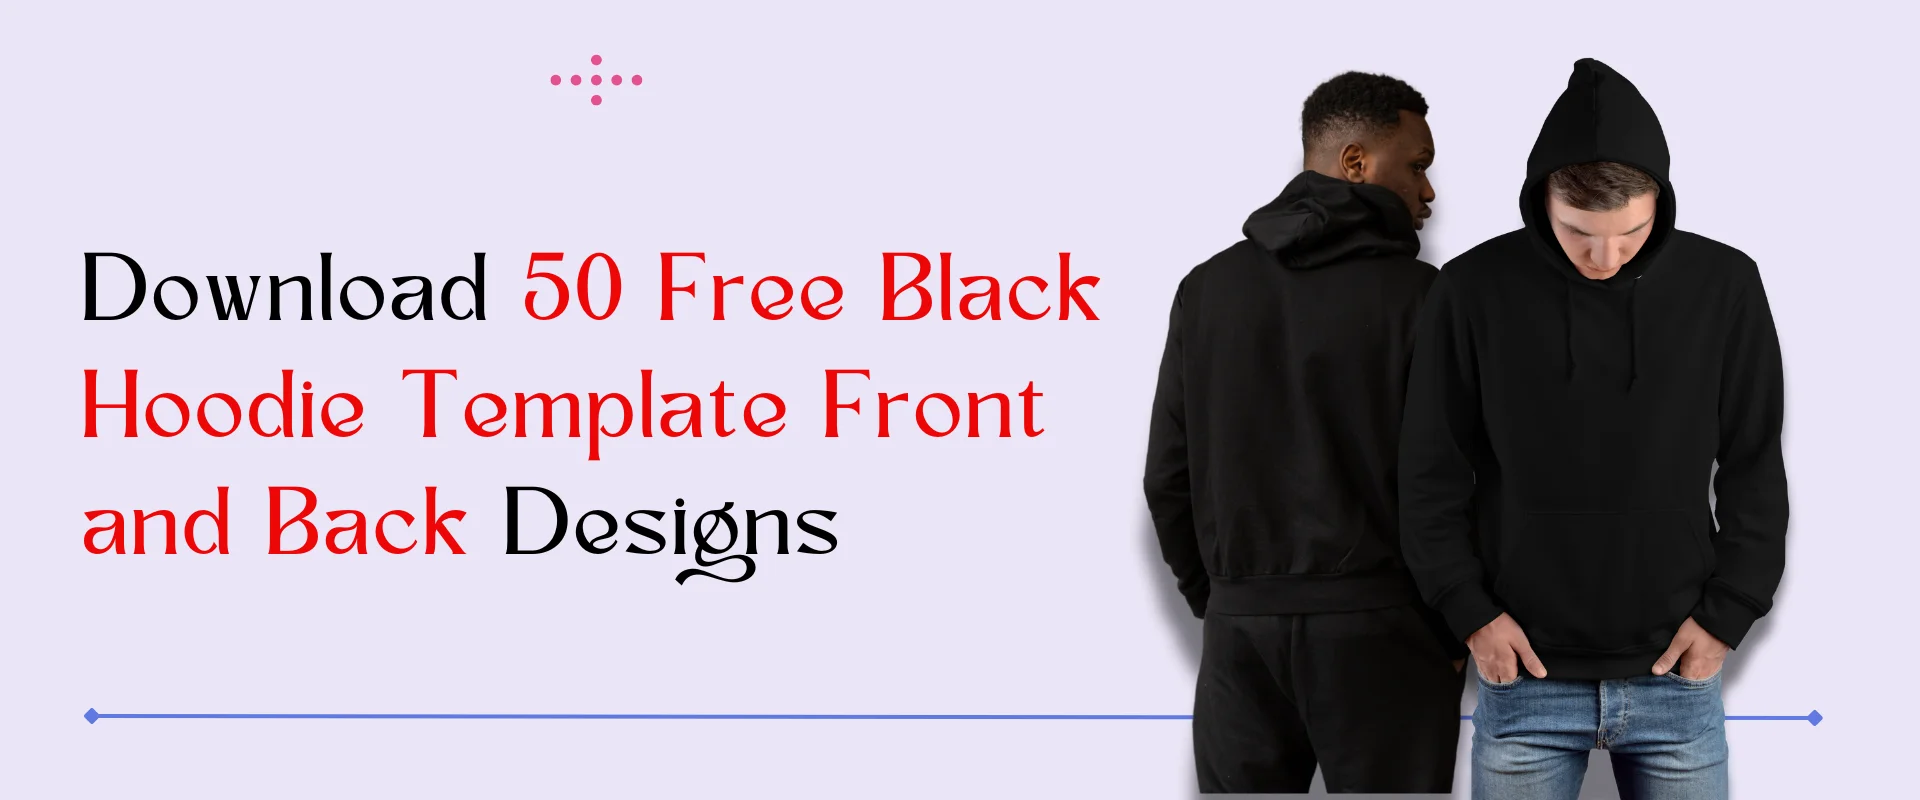 Free Black Hoodie Template Front and Back to Download